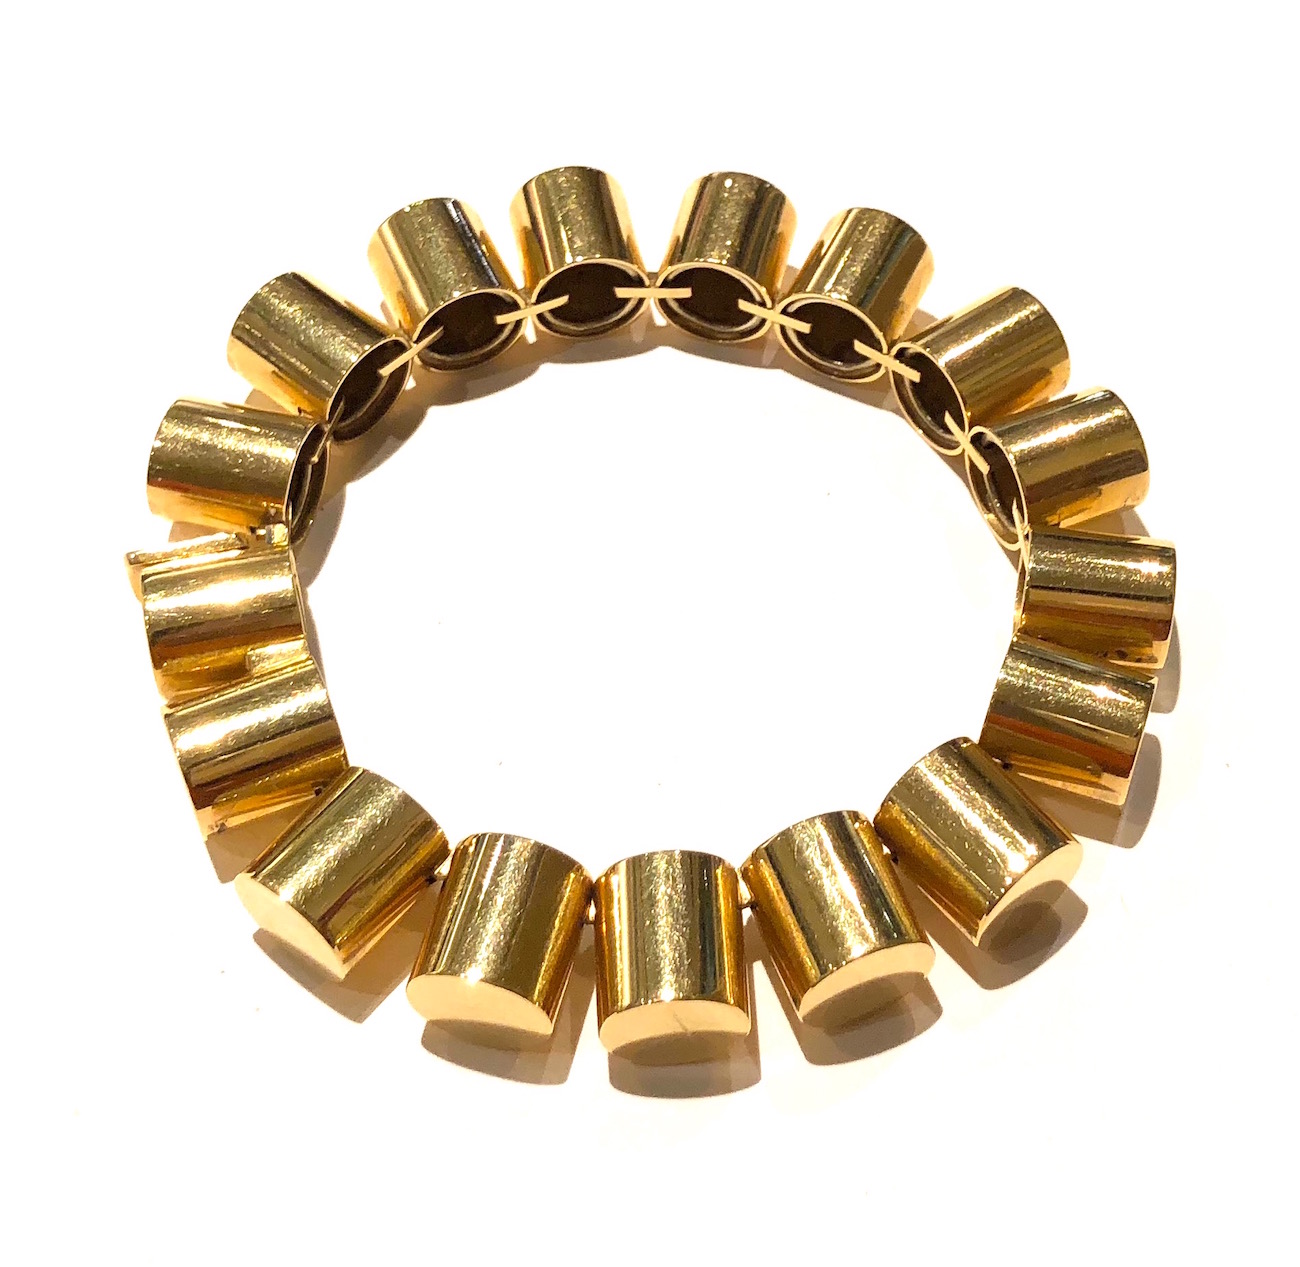 European “Linked Discs” bracelet, 18K gold, signed with a triangle touch mark, a rectangle cartouche and 750 for 18k gold, c. 1970’s